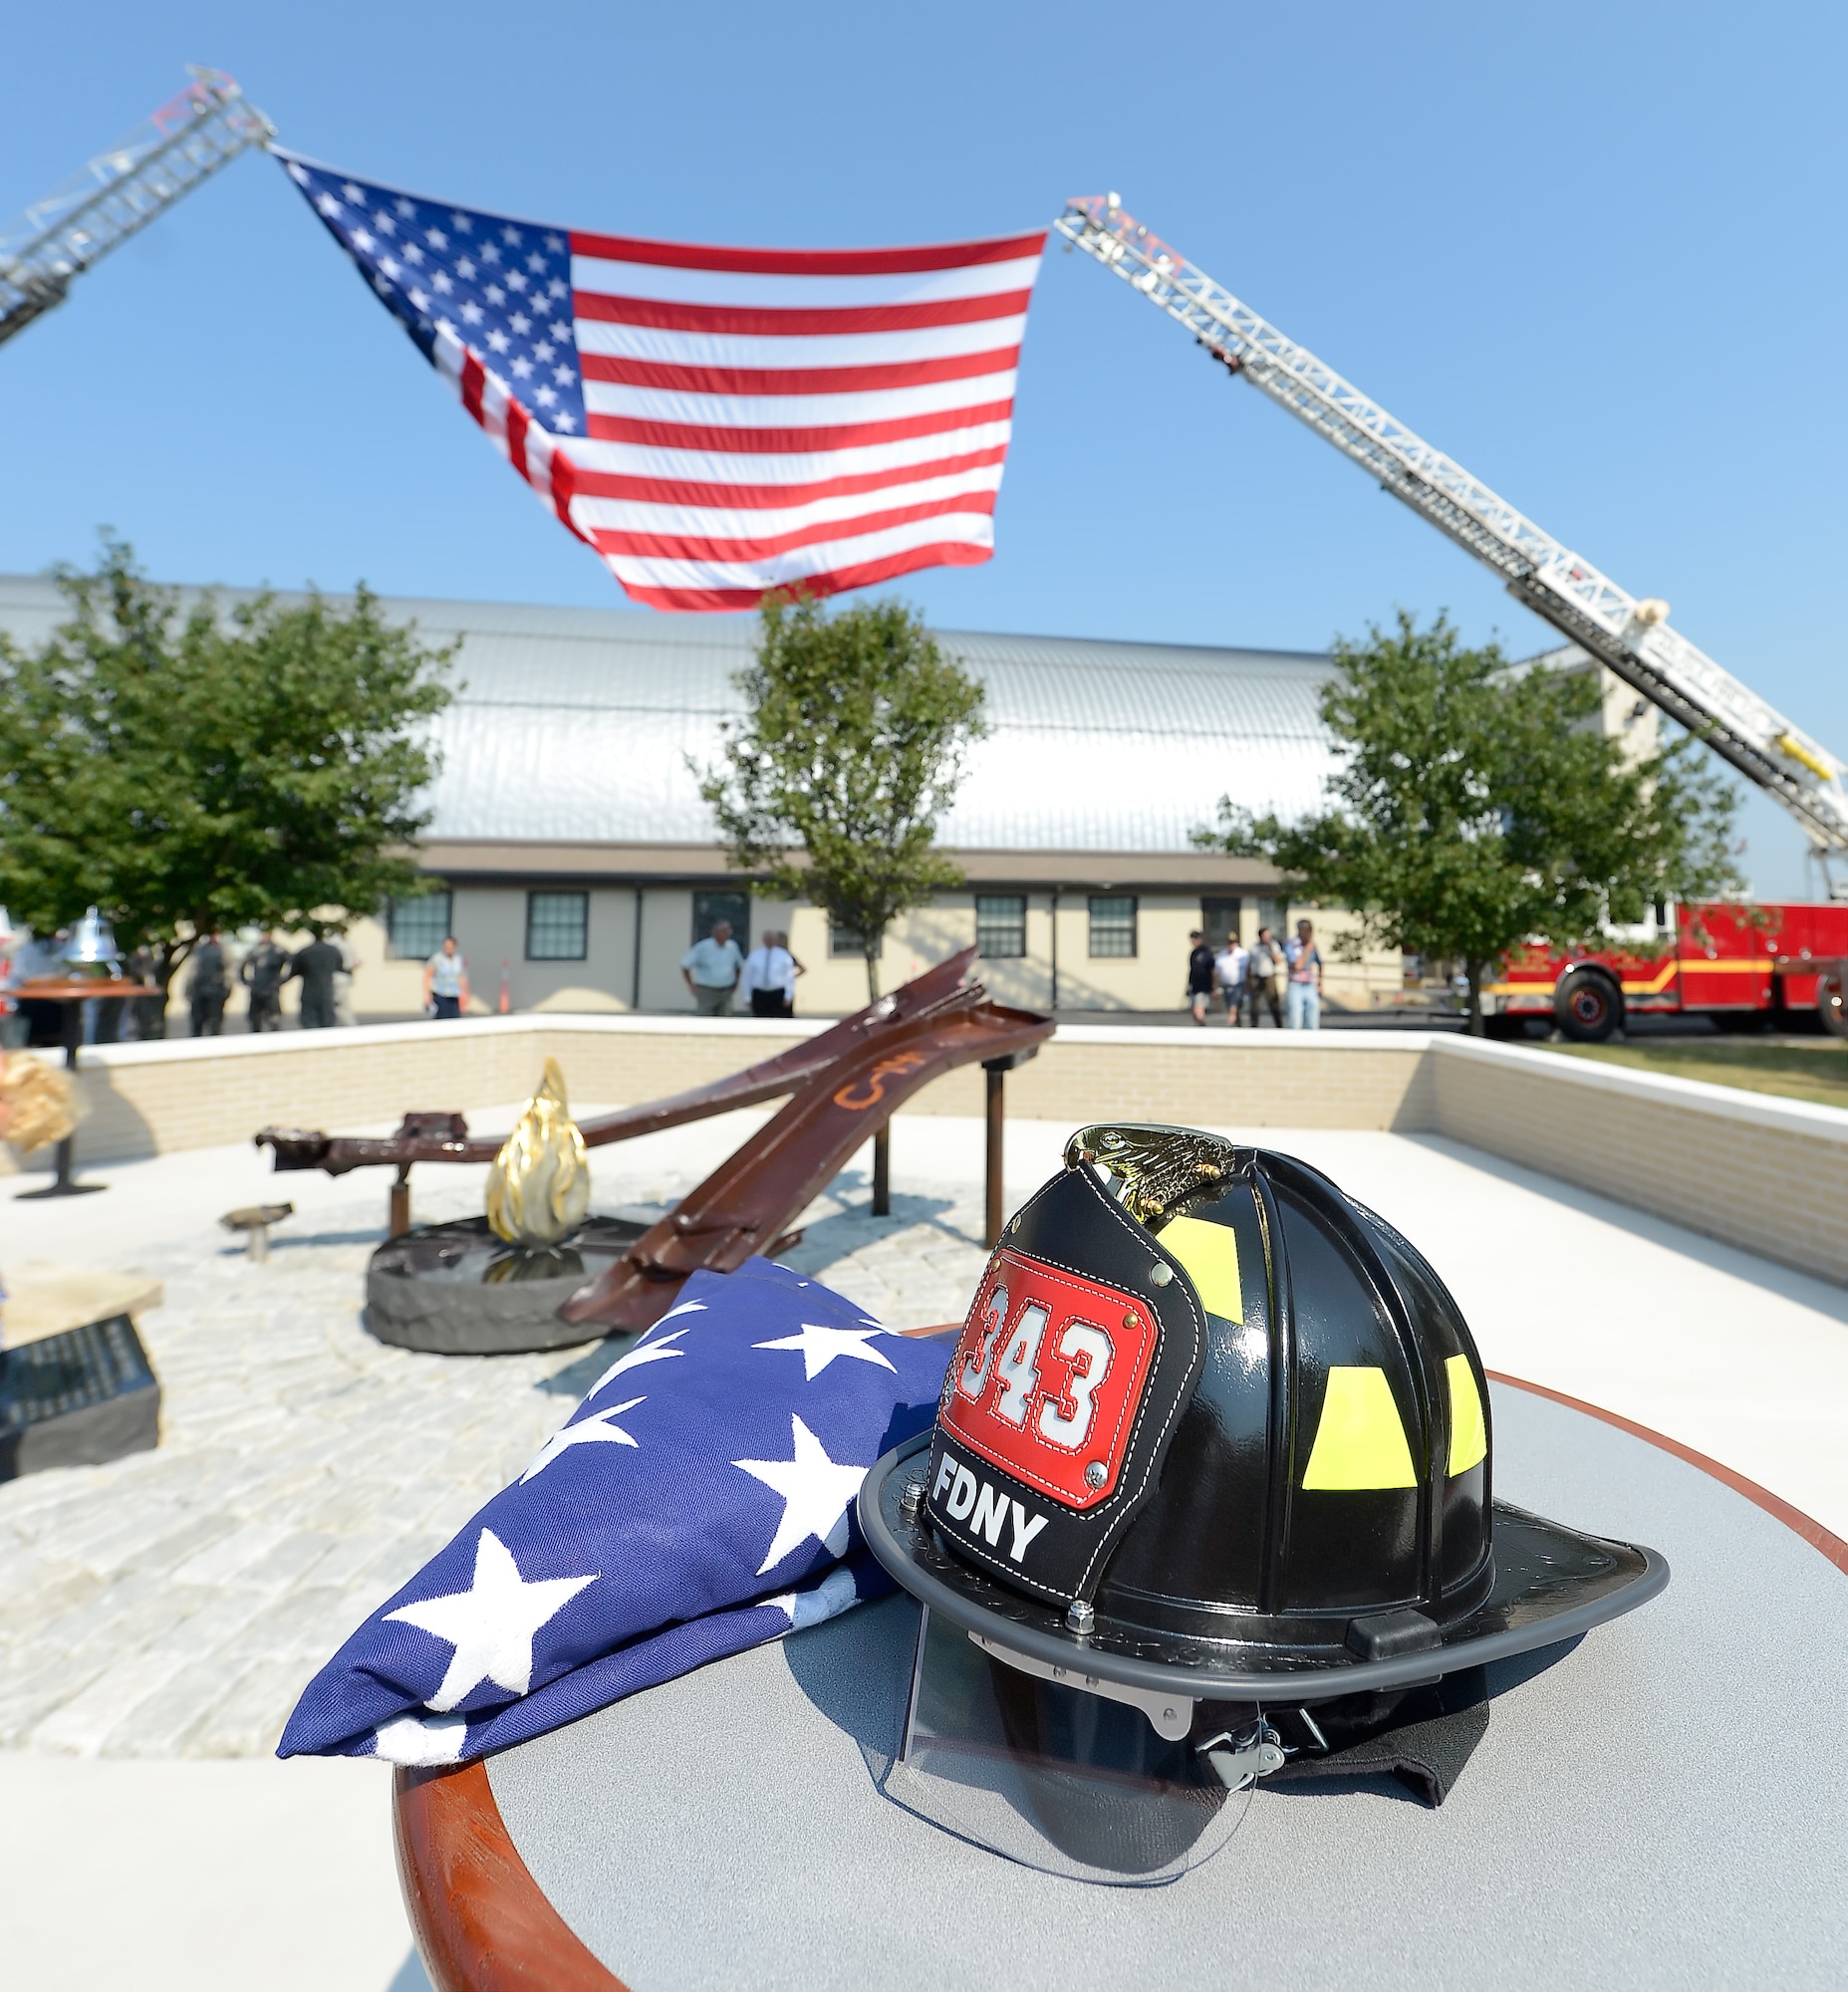 A firefighters helmet from the New York Fire Department along with a folded flag are visible sitting on a table next to the newly unveiled memorial to those killed on Sept. 11, 2001, at the Air Mobility Command museum Sept. 11, 2013, at Dover Air Force Base, Del. The memorial, which incorporates two pieces of steel from World Trade Center tower one, a rock from the United Airlines Flight 93 crash site and a block from the damaged portion of the Pentagon, makes Delaware the 50th and final state to have a public memorial. The steel was acquired through the Port Authority of New York and New Jersey World Trade Center steel program. (U.S. Air Force photo/Greg L. Davis)